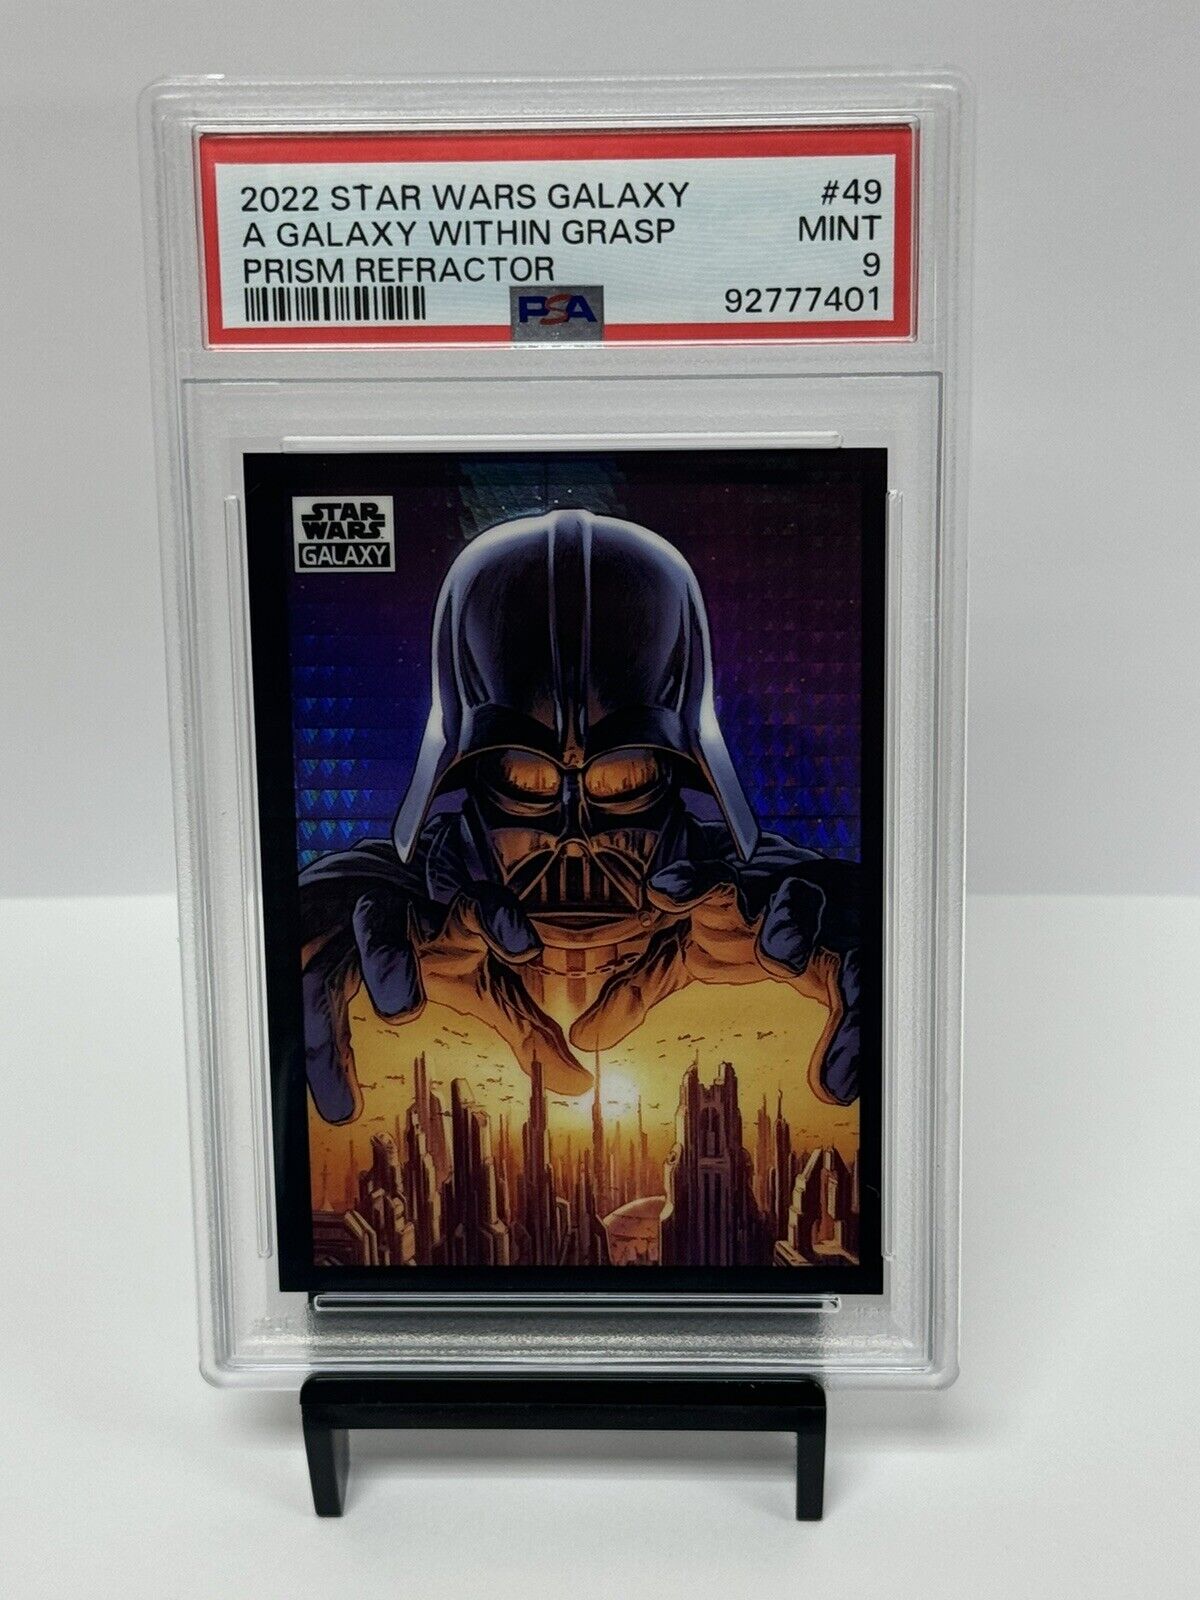 2022 Topps Star Wars Galaxy A Galaxy Within Grasp PRISM REFRACTOR /75 PSA 9🔥🔥